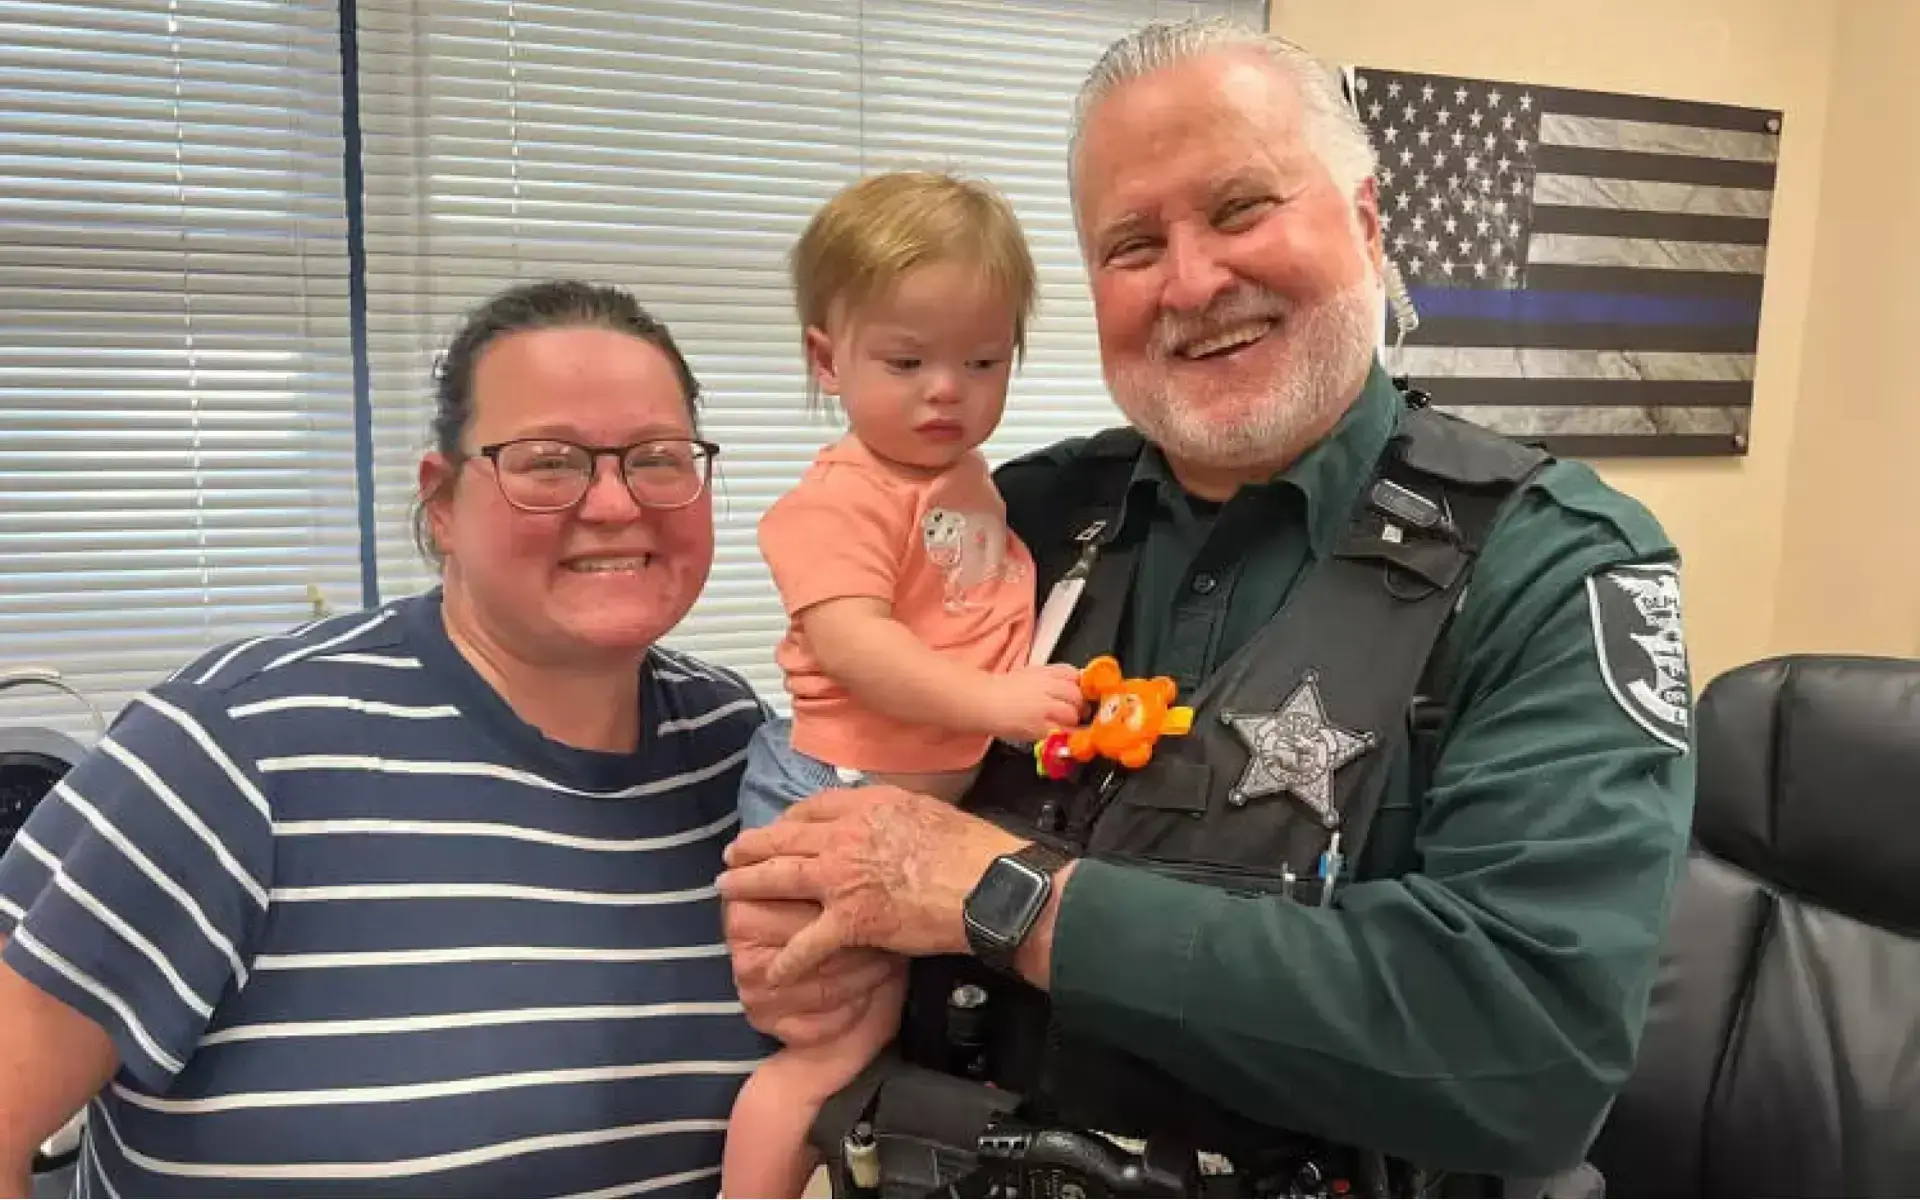 Heroic School Resource Officer Saves Baby who can’t Breathing